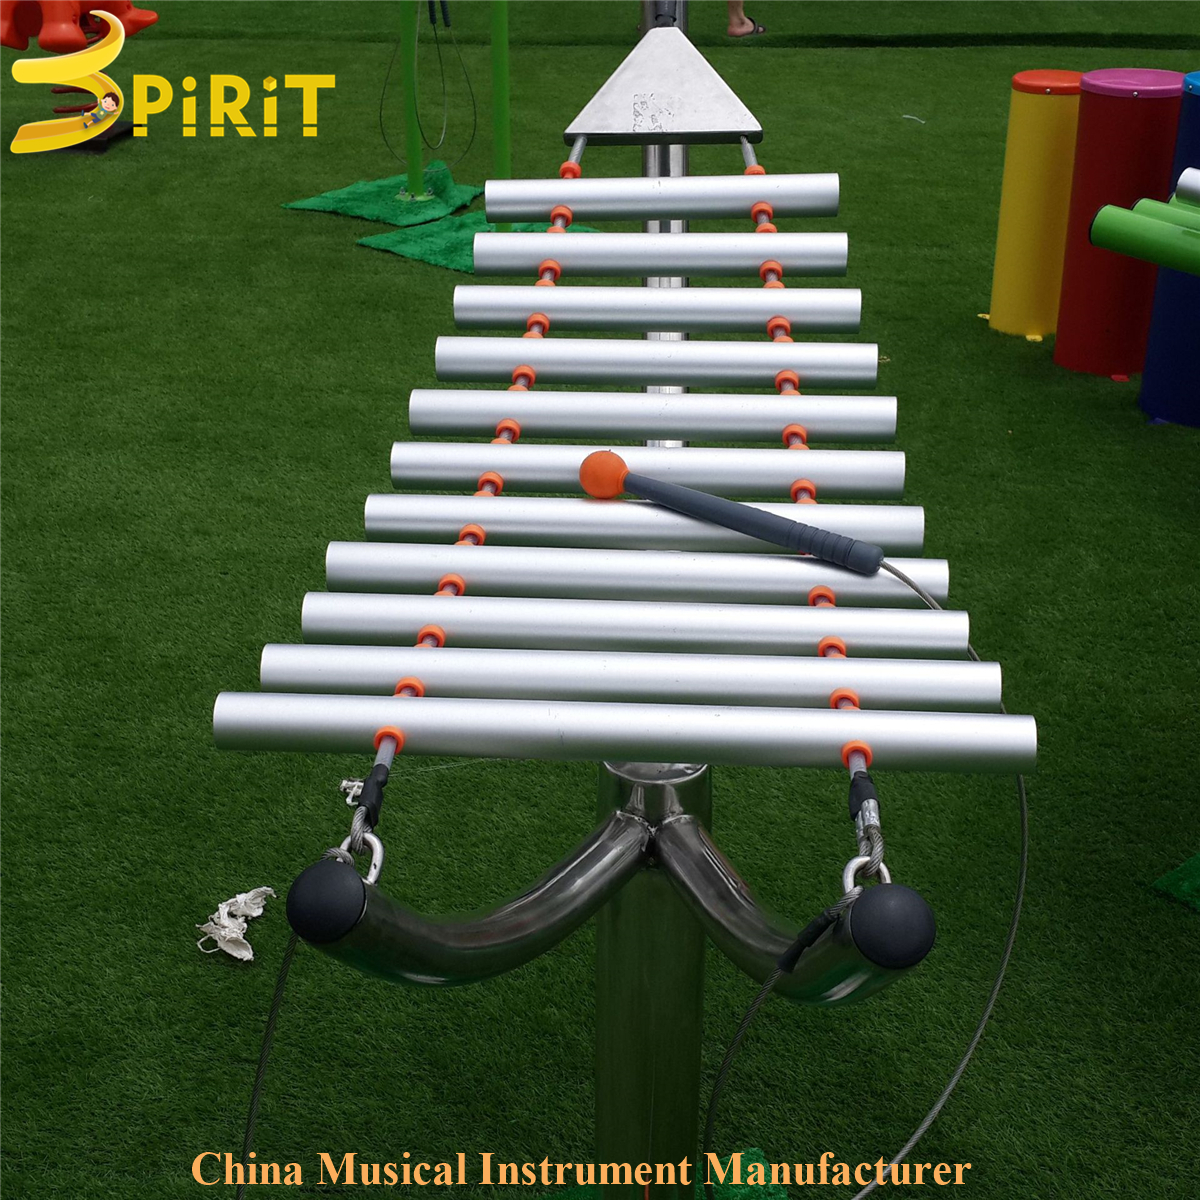 How to install the music instruments for preschool in my place?-SPIRIT PLAY,Outdoor Playground, Indoor Playground,Trampoline Park,Outdoor Fitness,Inflatable,Soft Playground,Ninja Warrior,Trampoline Park,Playground Structure,Play Structure,Outdoor Fitness,Water Park,Play System,Freestanding,Interactive,independente ,Inklusibo, Park, Pagsaka sa Bungbong, Dula sa Bata